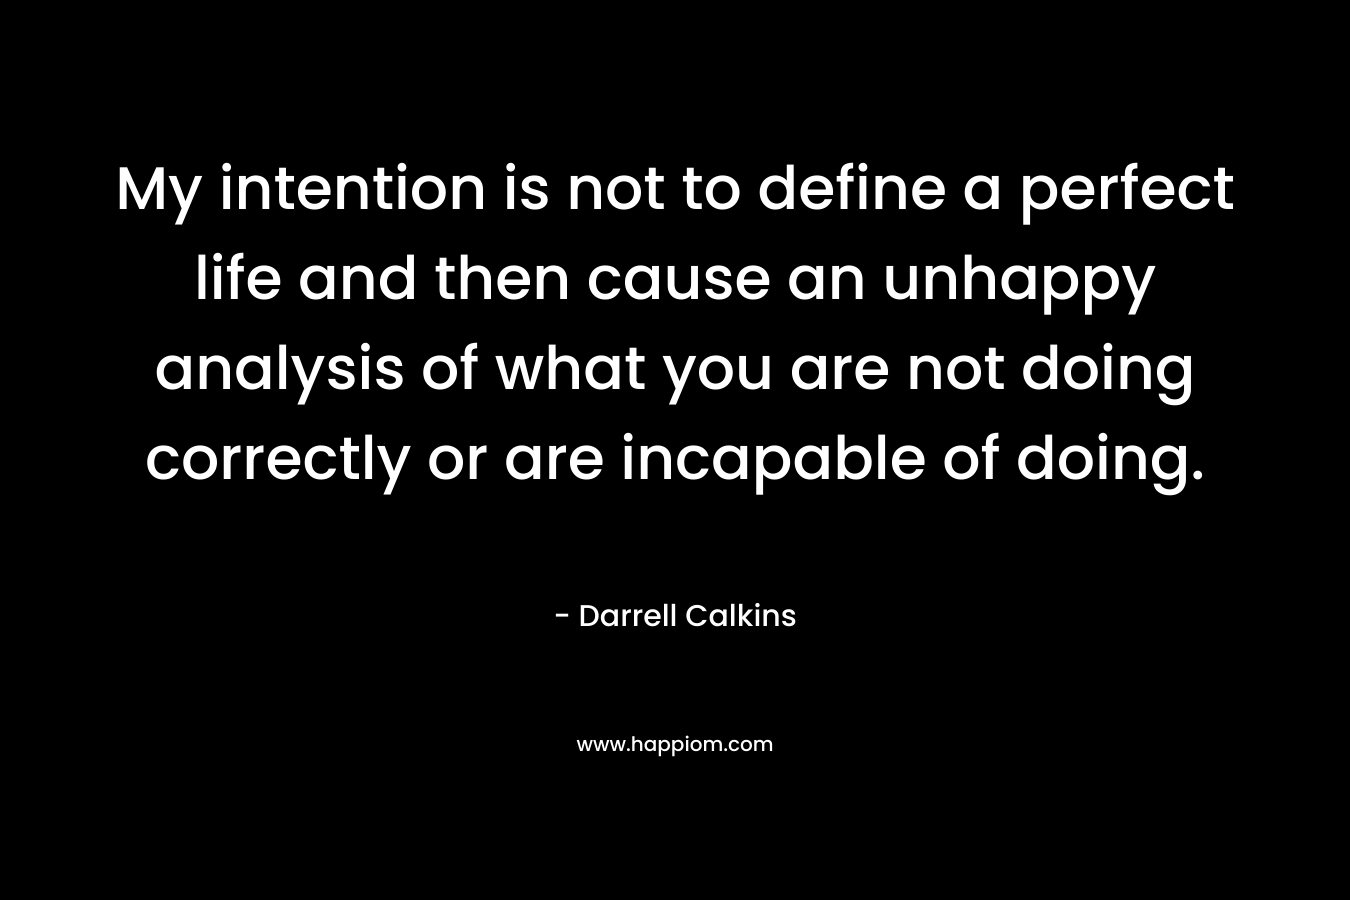 My intention is not to define a perfect life and then cause an unhappy analysis of what you are not doing correctly or are incapable of doing.